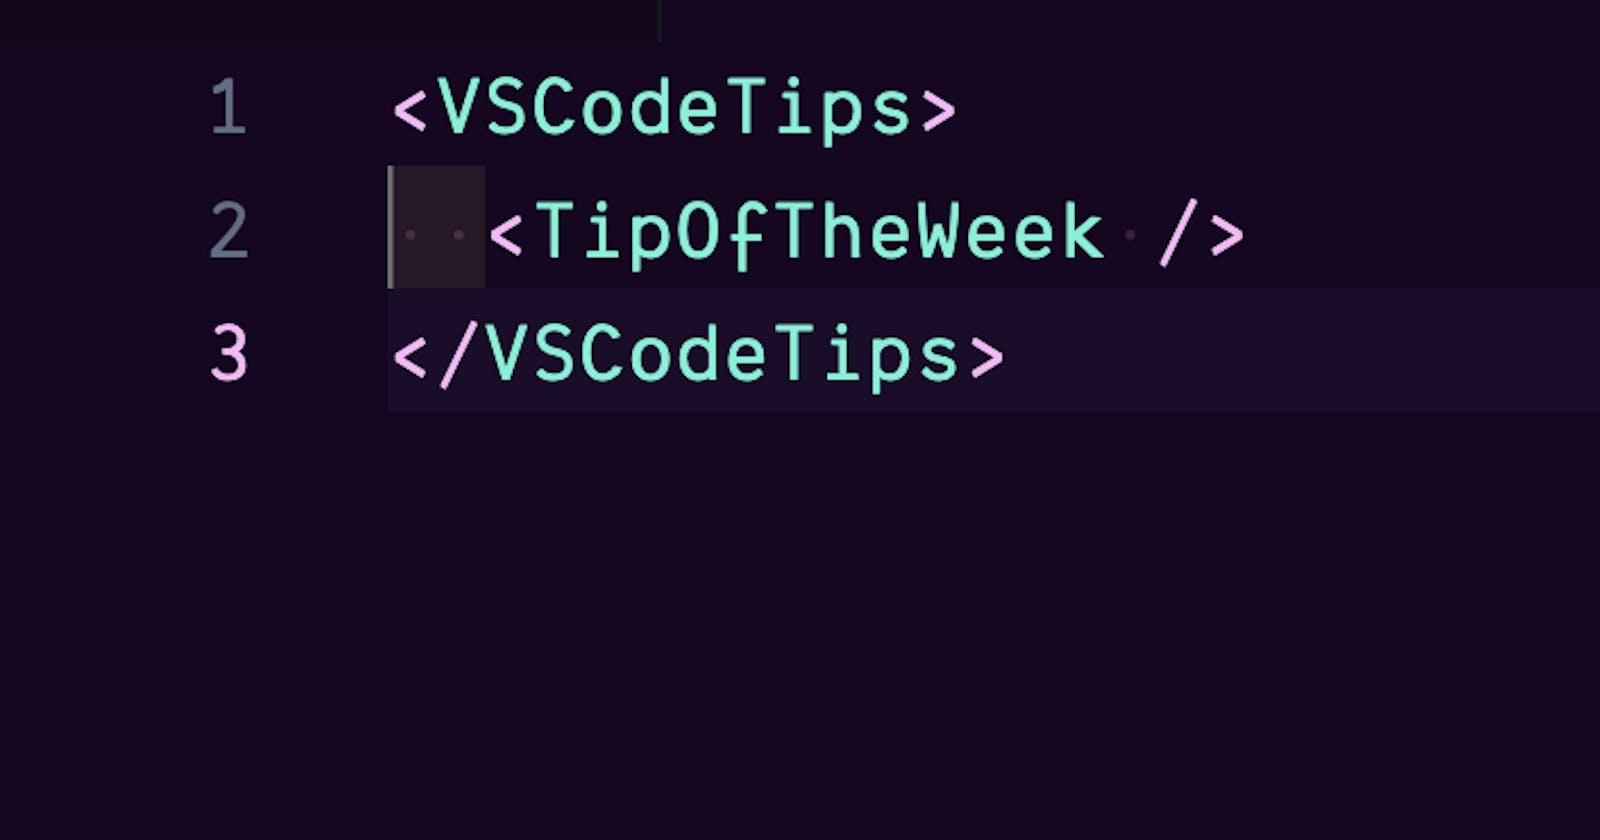 VS Code Tip of the Week: Customize Indent/Colour of Indent Guide